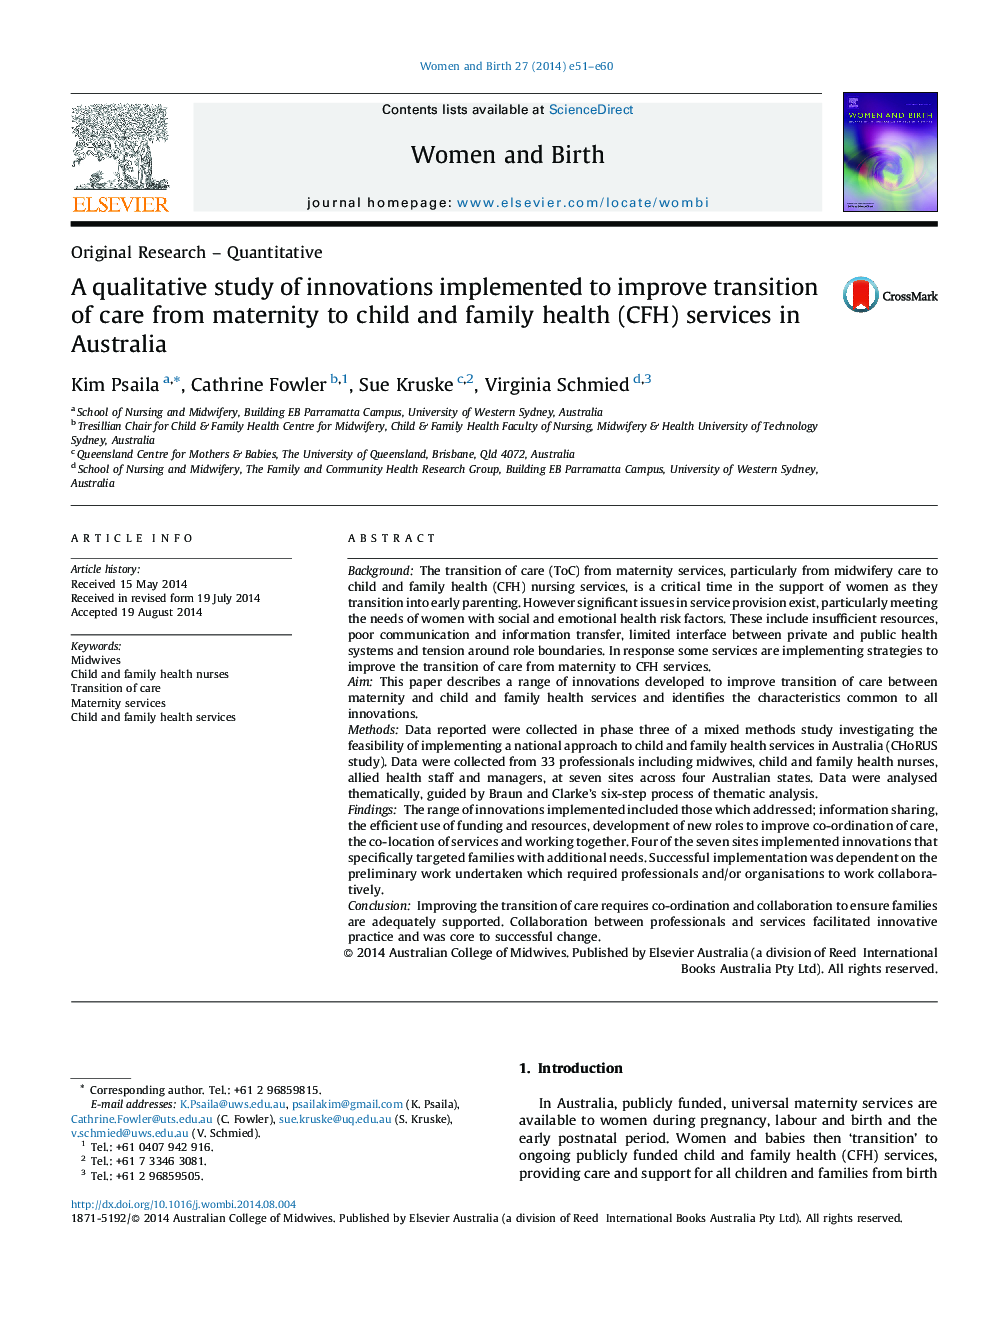 A qualitative study of innovations implemented to improve transition of care from maternity to child and family health (CFH) services in Australia